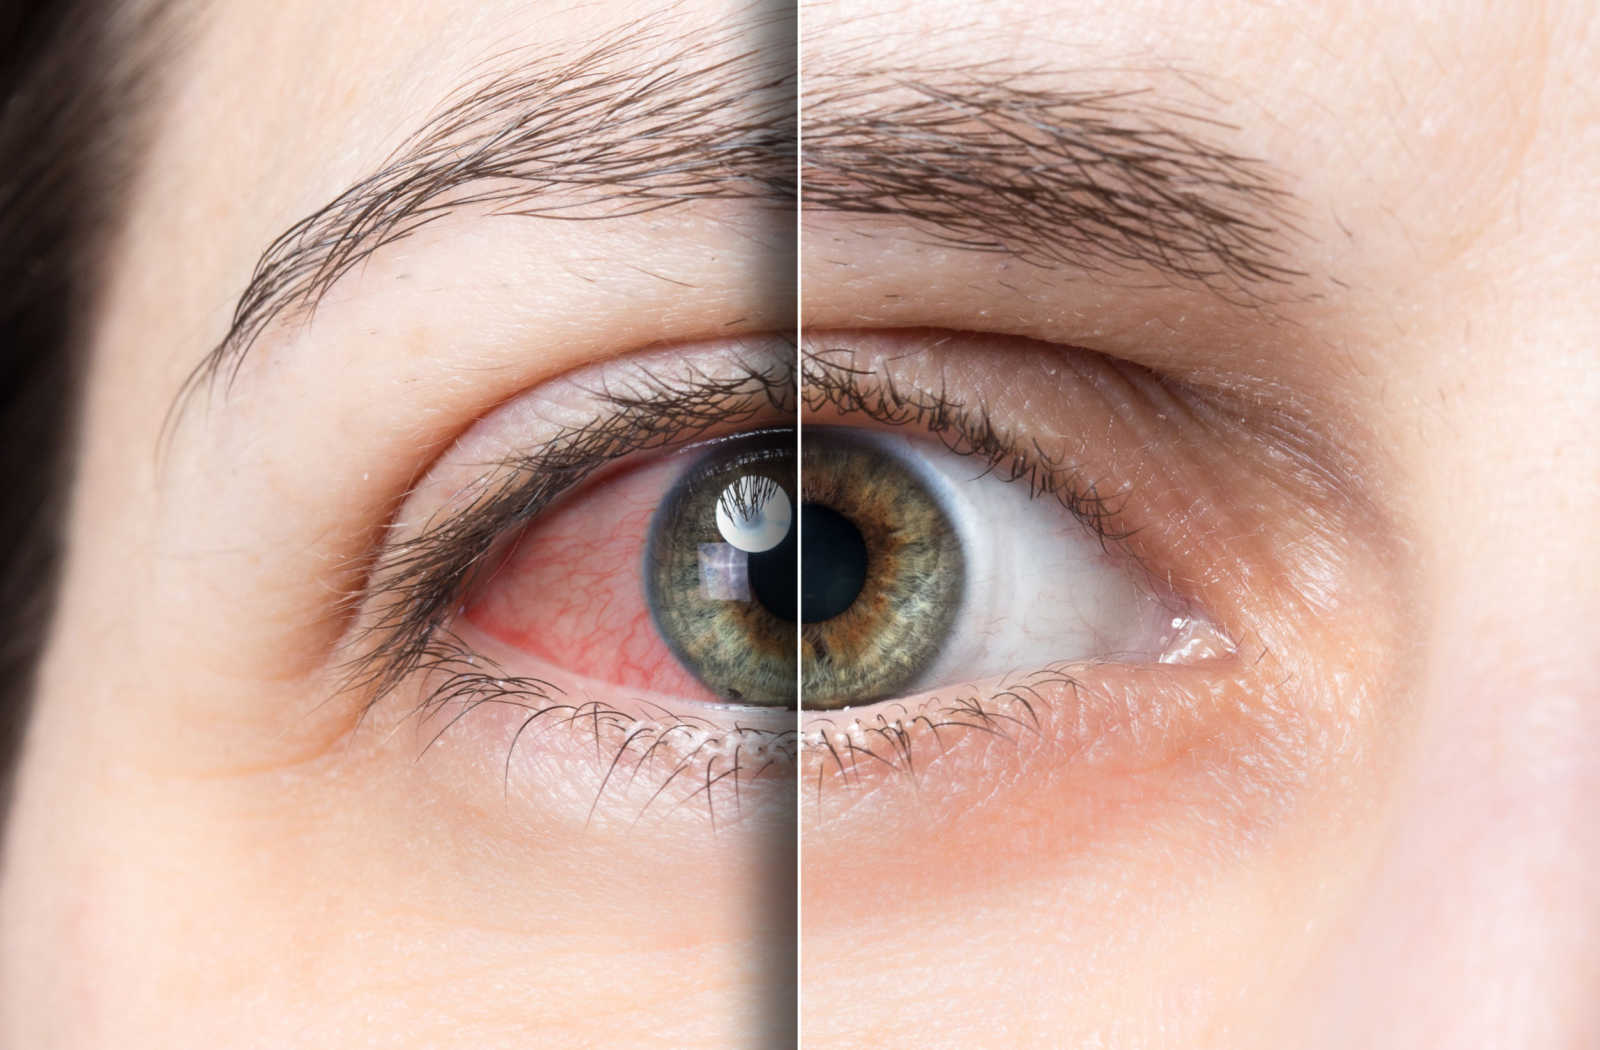 Side by side comparison of an irritated eye. The left side of the image shows a close-up of a person's eye with a noticeable redness. The right side of the image shows the same eye after the redness has been treated.